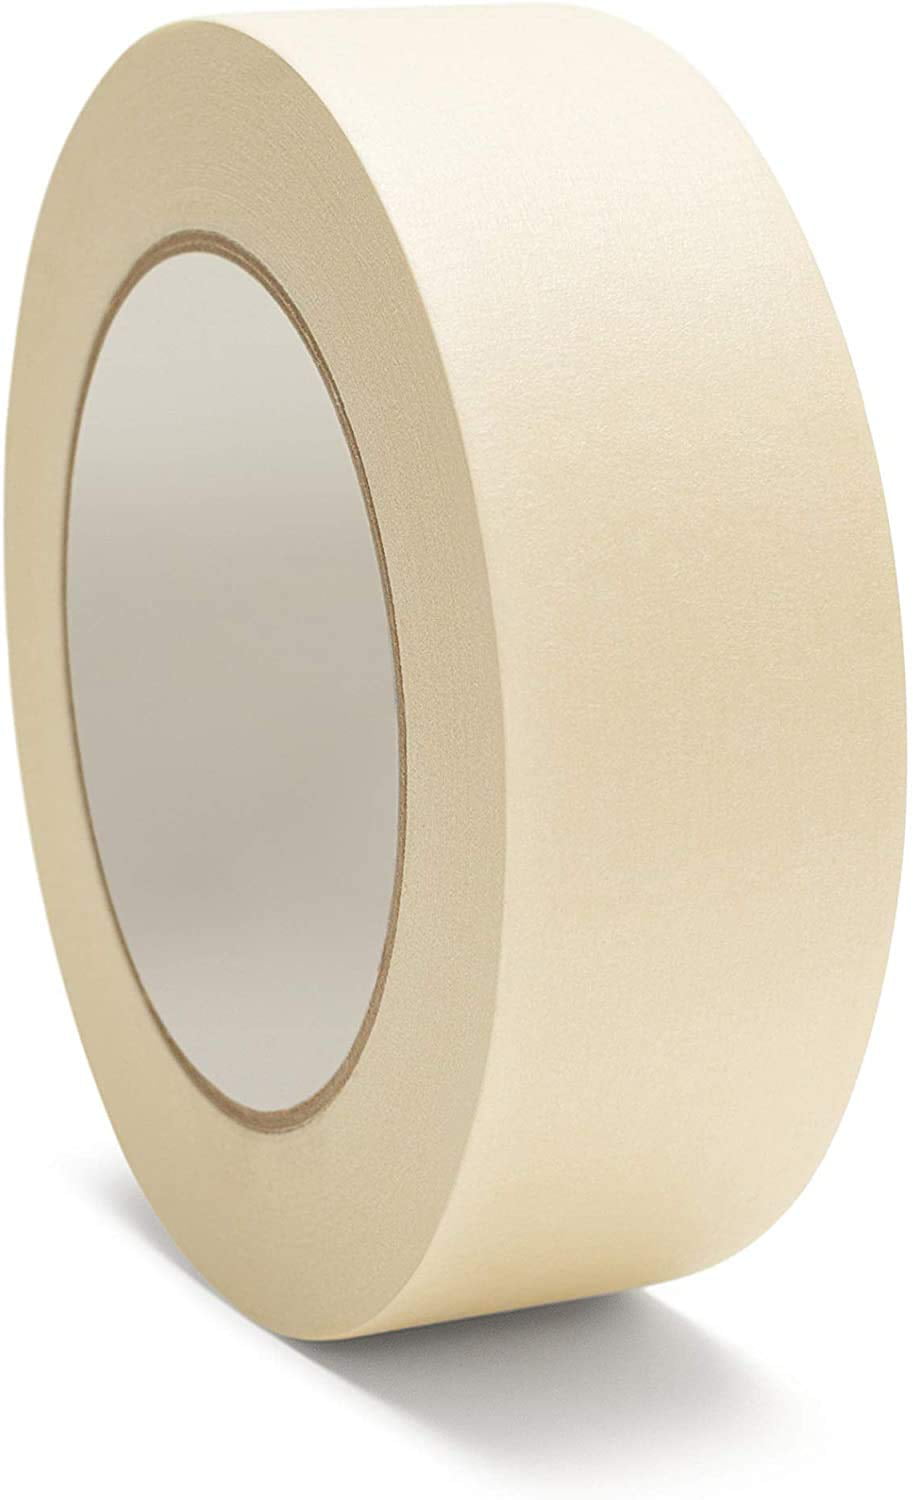 Youking White Masking Tape 2 Inch Wide, Easy Tear Painter'S Tape